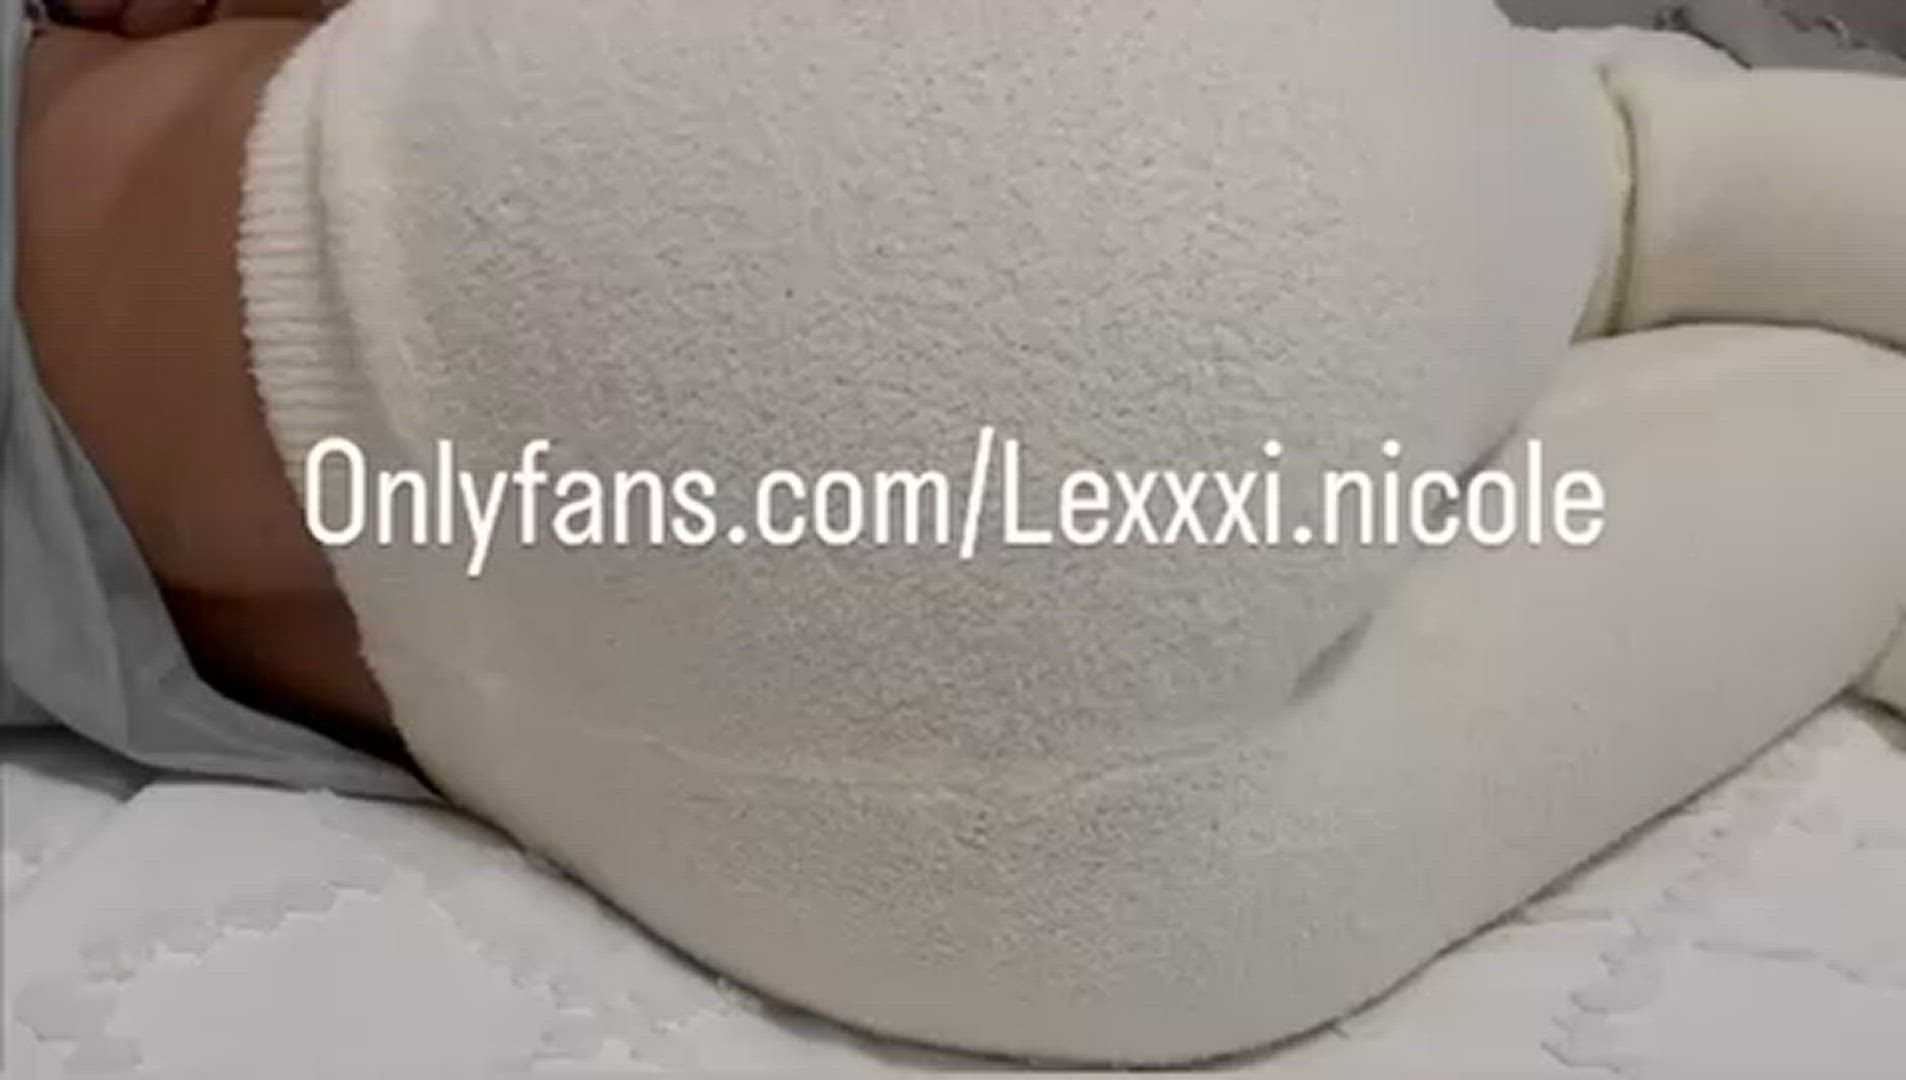 Fart porn video with onlyfans model lexxxinicole <strong>@lexxxi.nicole</strong>